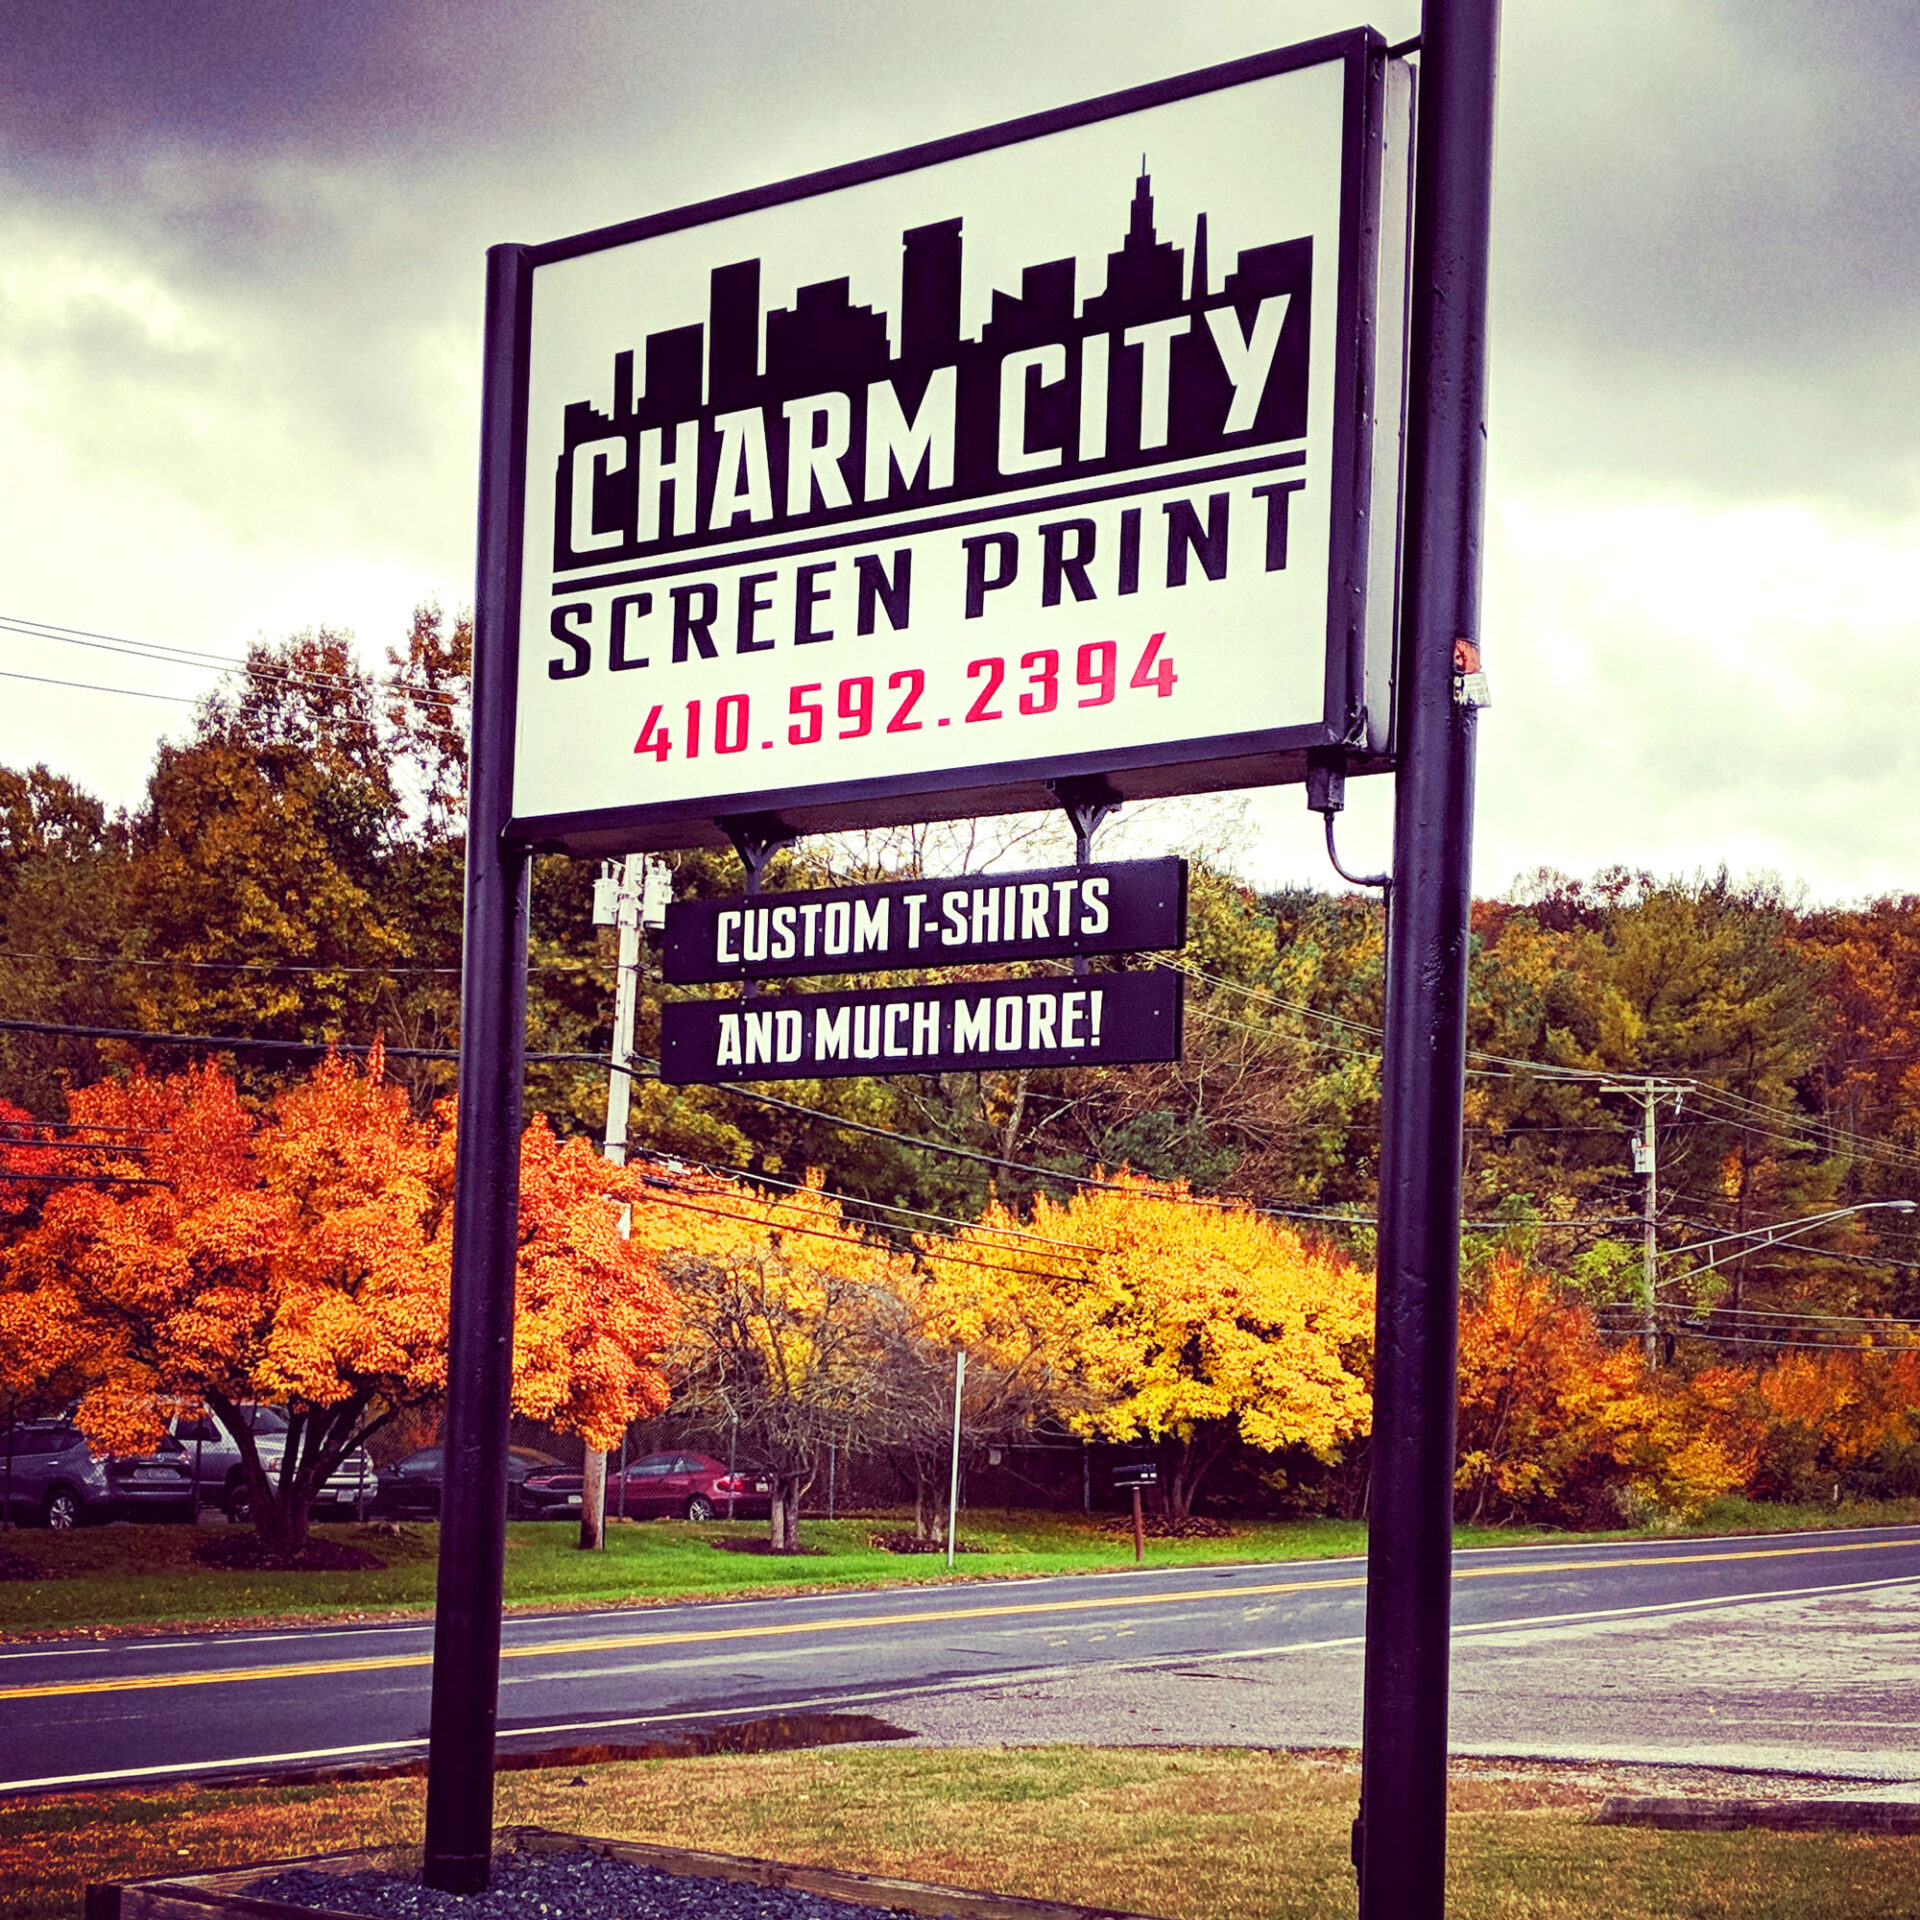 Vignette shot of the Charm City Screen Print sign in front of our facility that offers screen printing and embroidery services